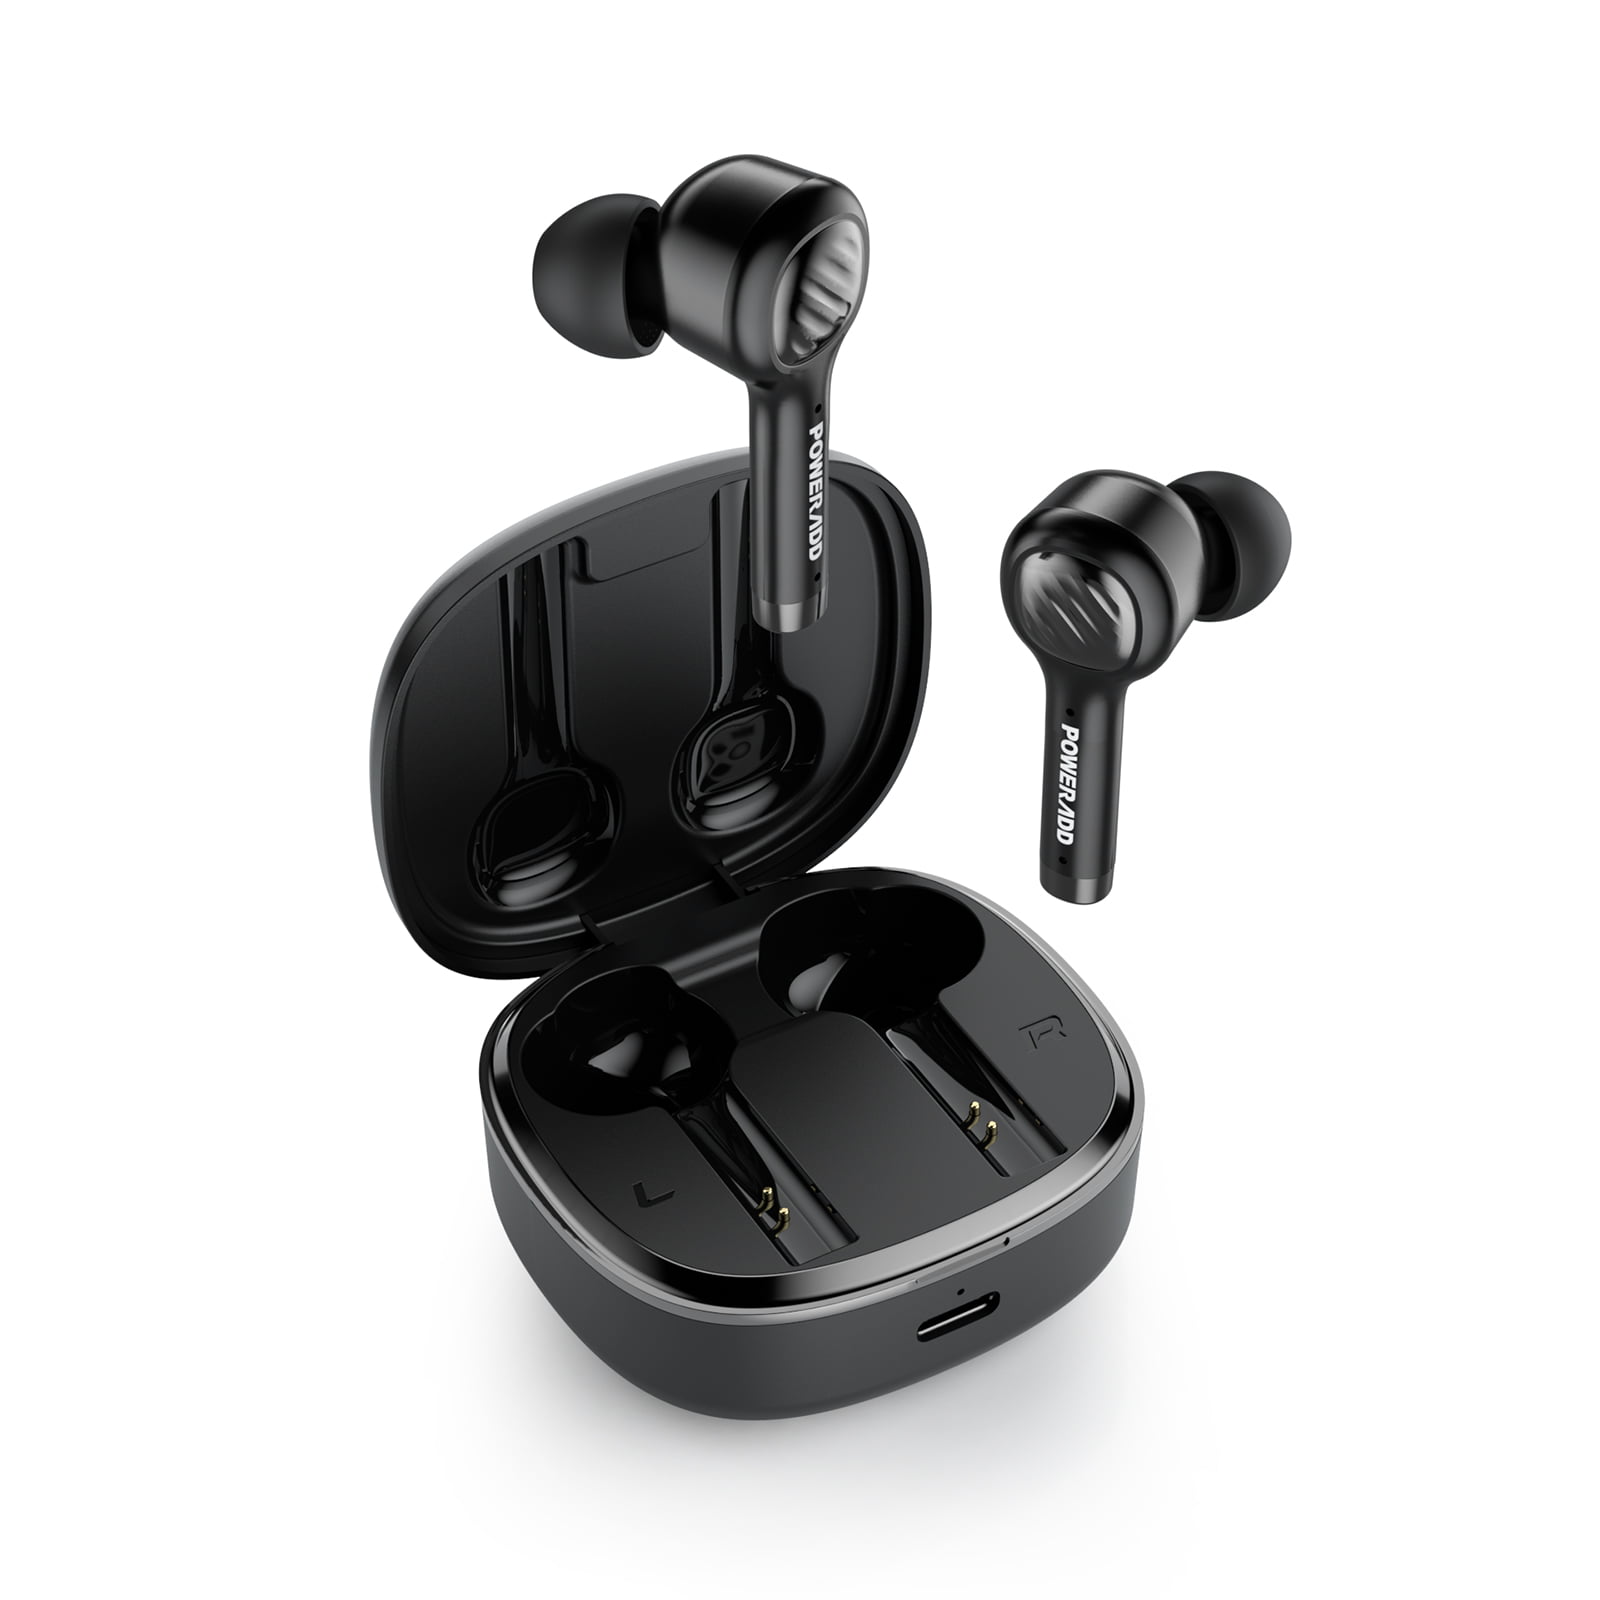 in-Ear Headphones Noise Cancelling Headphones 3D Stereo Bluetooth Headset Auto-Paired Convenient Call Built-in Microphone Compatible with All Smartphones